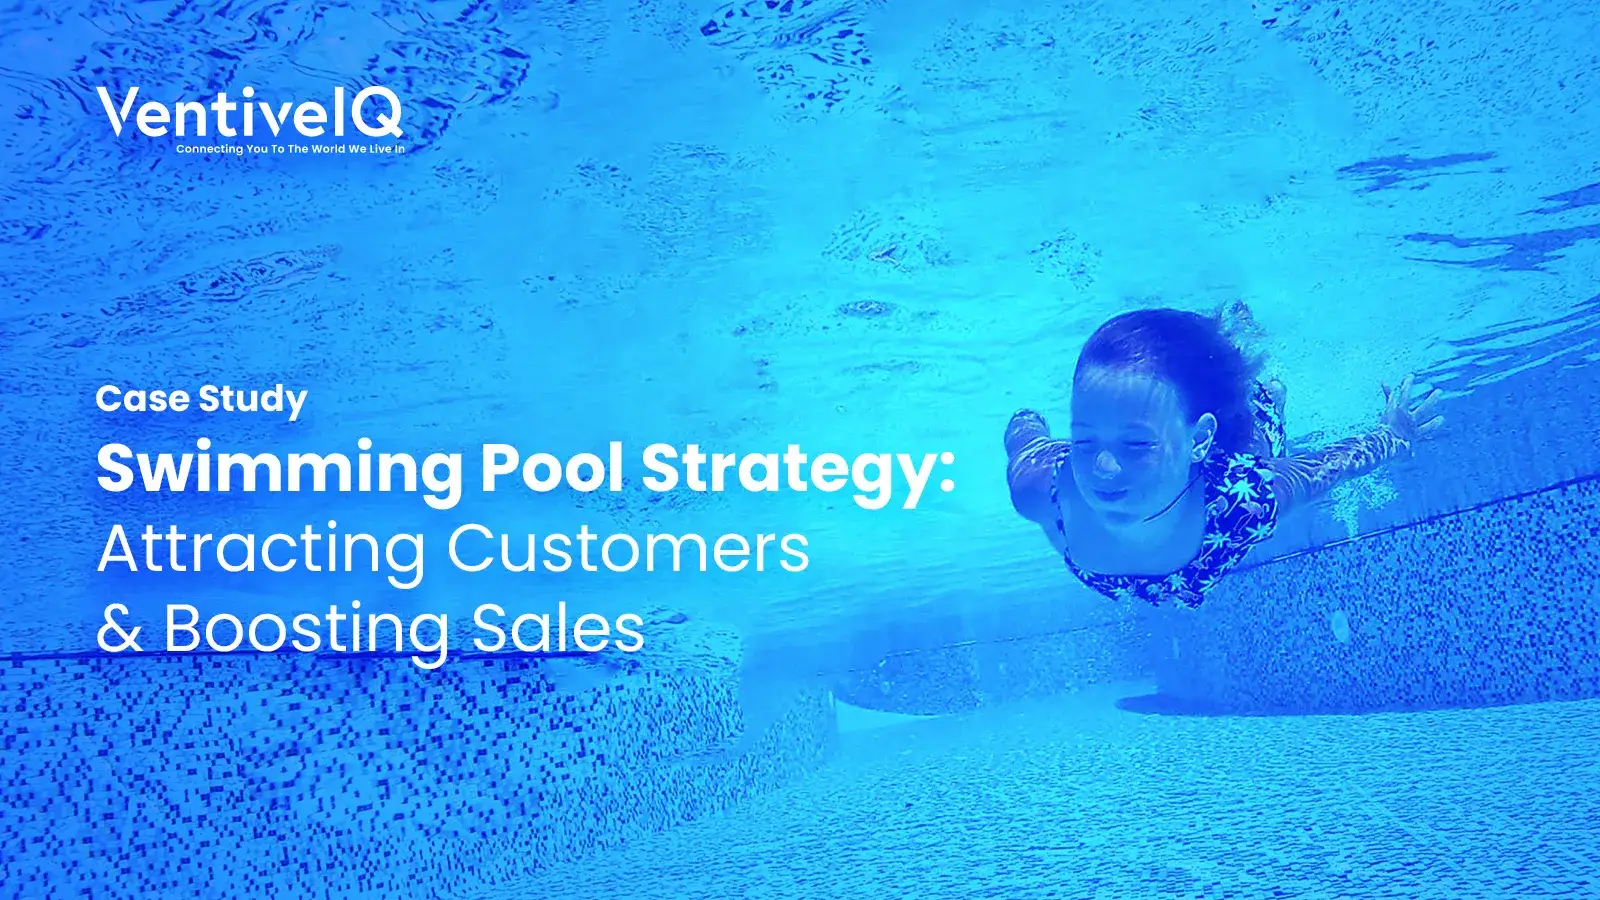 Swimming Pool Strategy: Attracting Customers & Boosting Sales